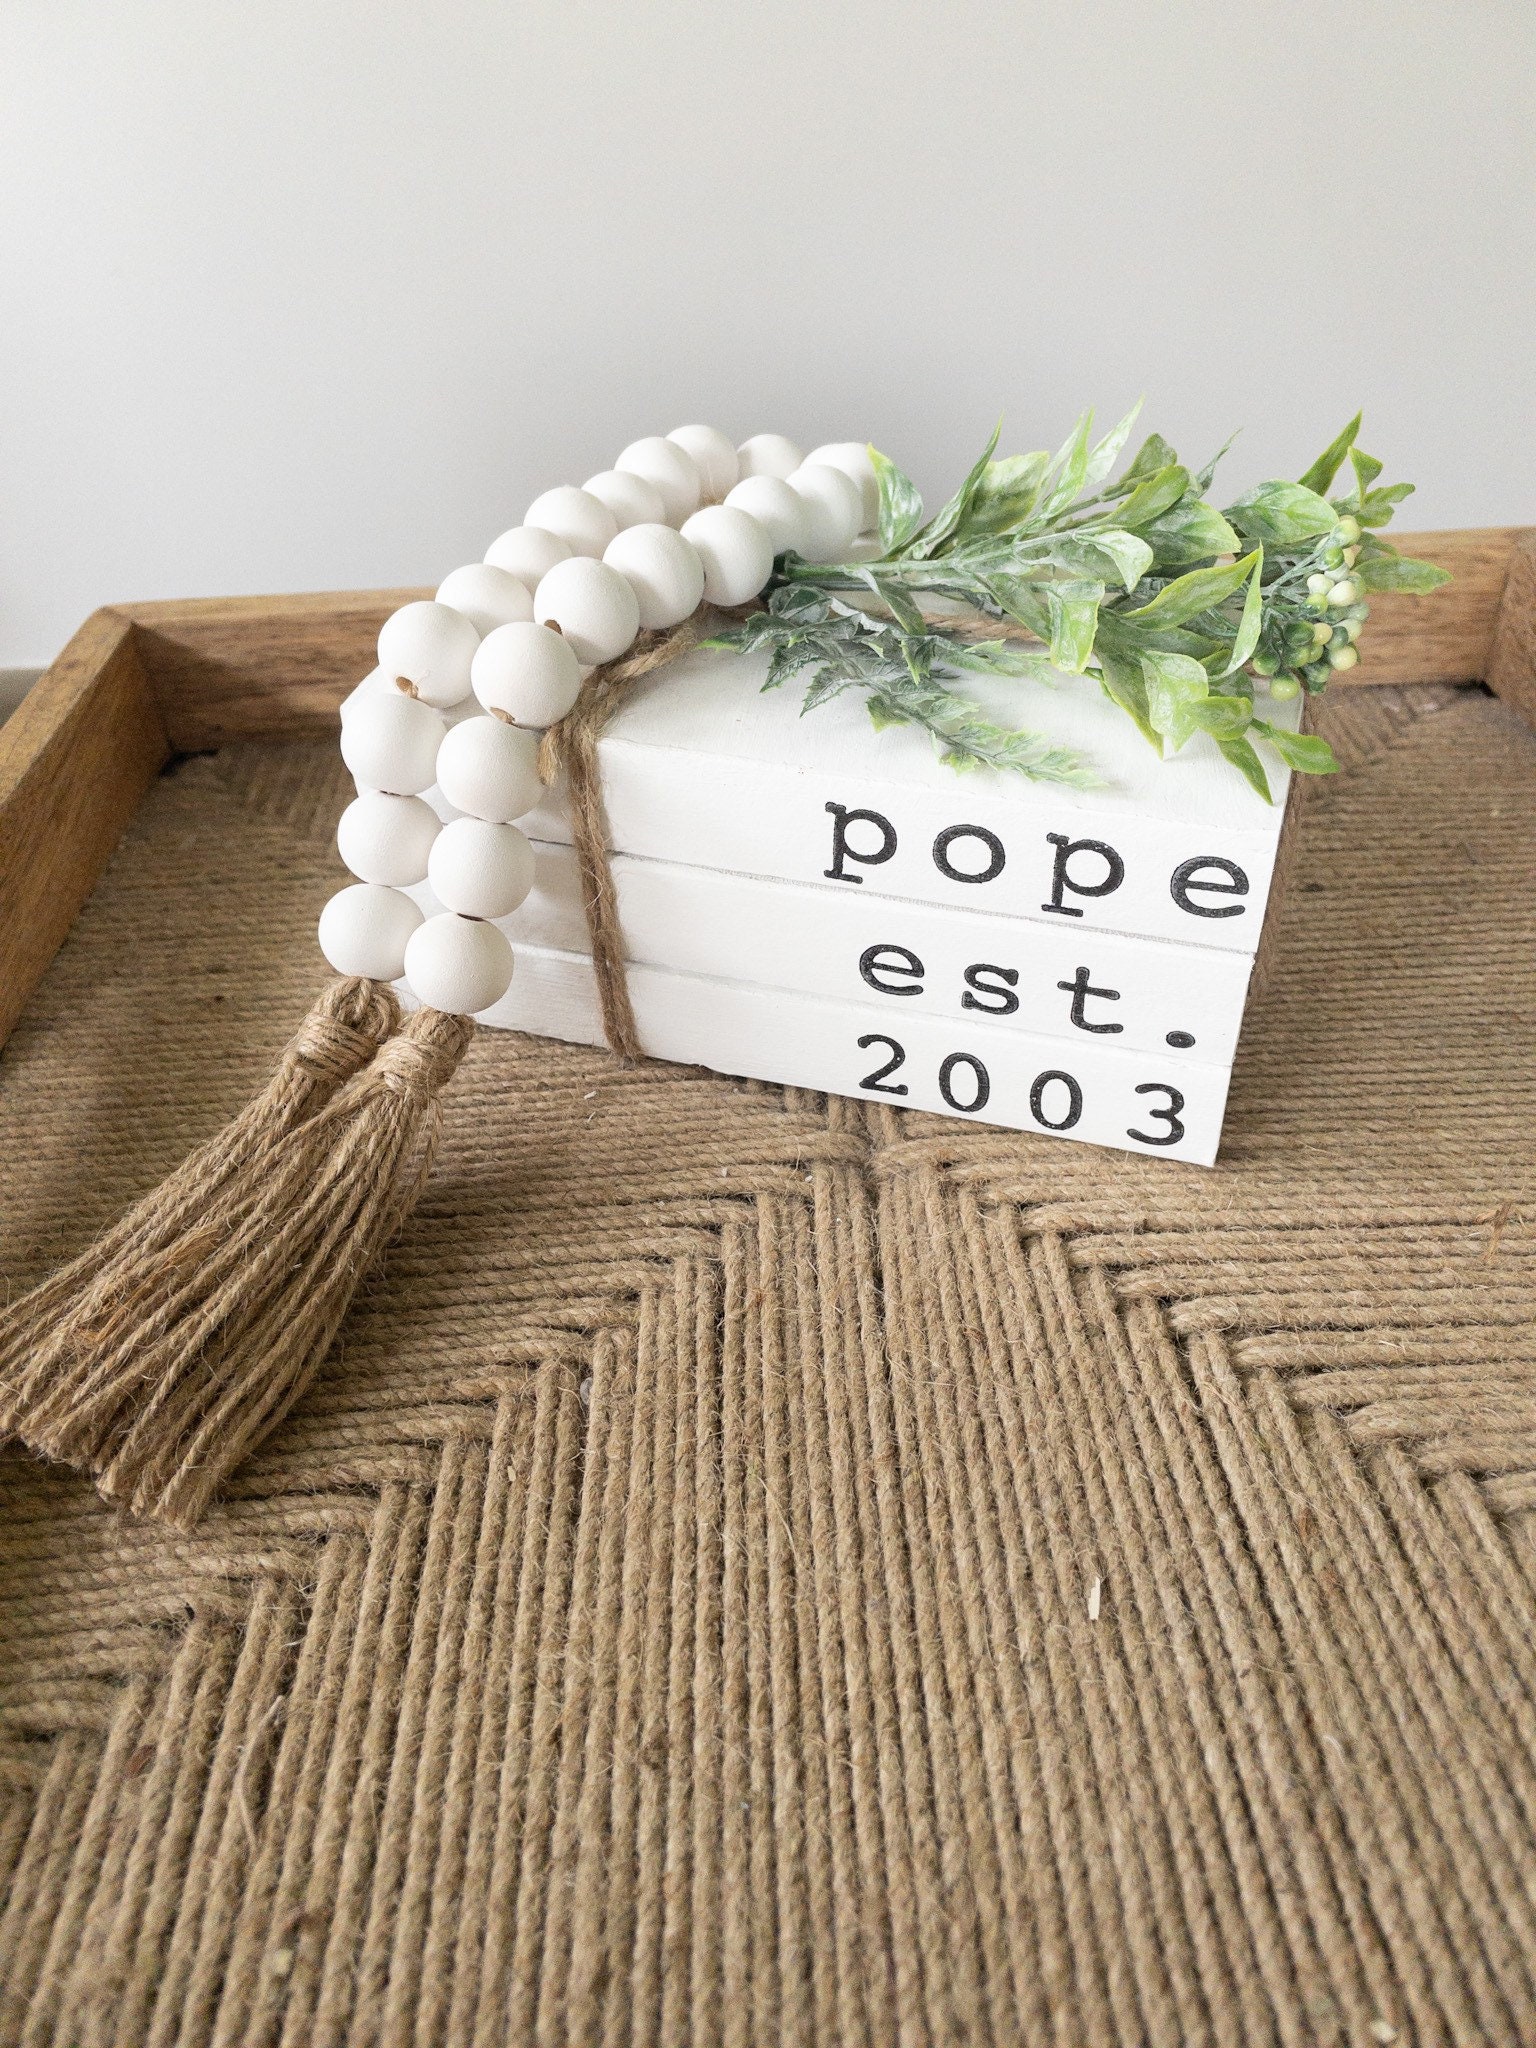 Ornativity Natural Wooden Beads Garland - Rustic Farmhouse Country Wood Bead Home Decor Wall Hanging Accents with Boho Jute Tassels